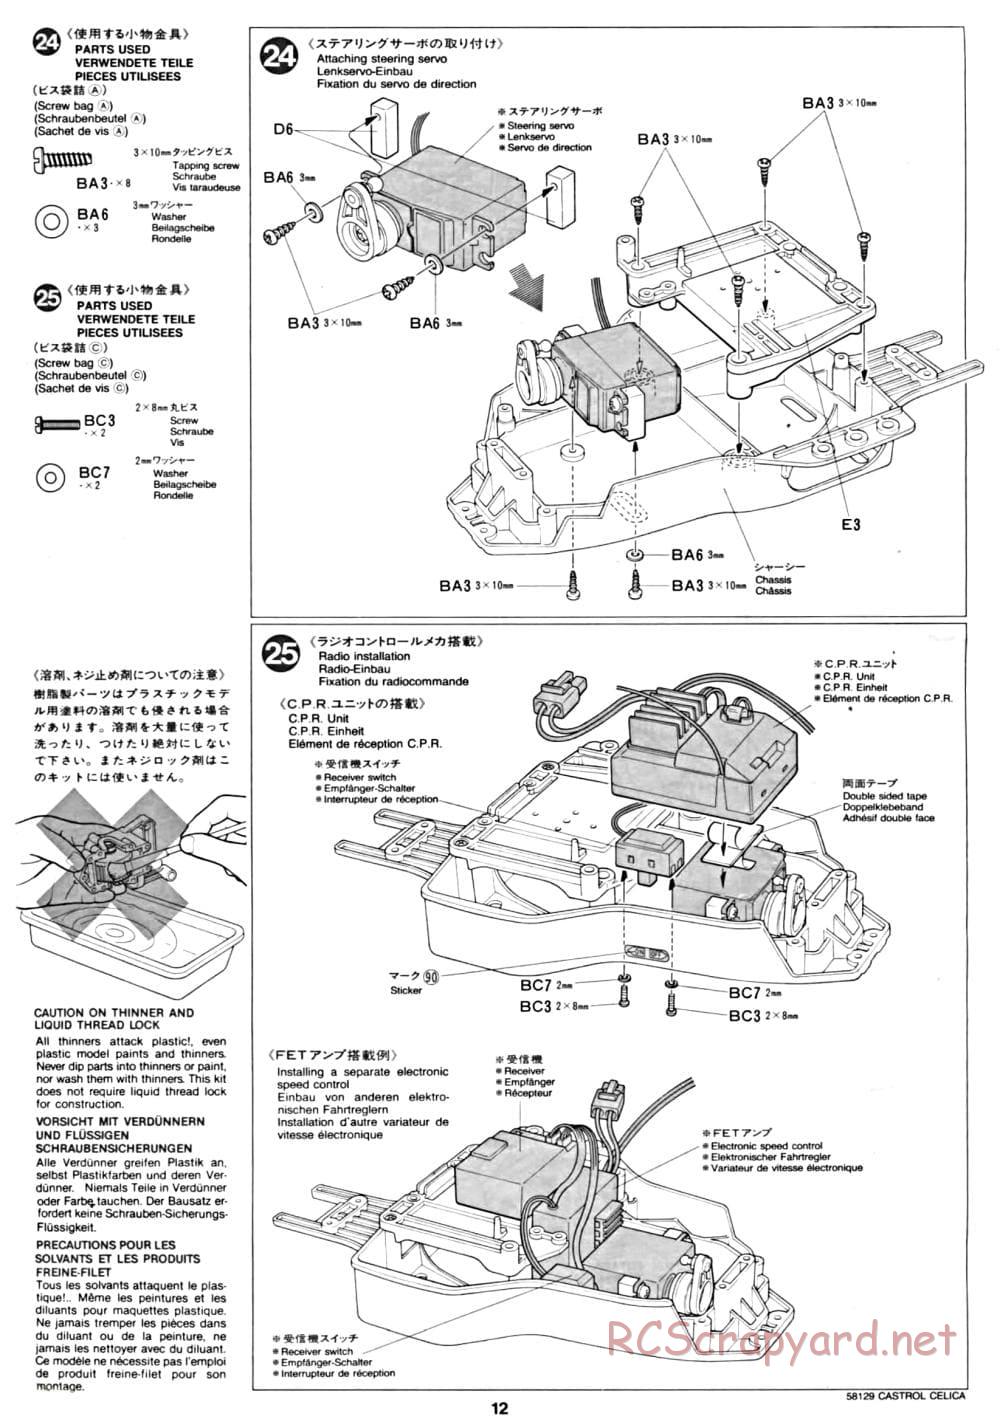 Tamiya - Castrol Celica 93 Monte-Carlo - TA-02 Chassis - Manual - Page 12